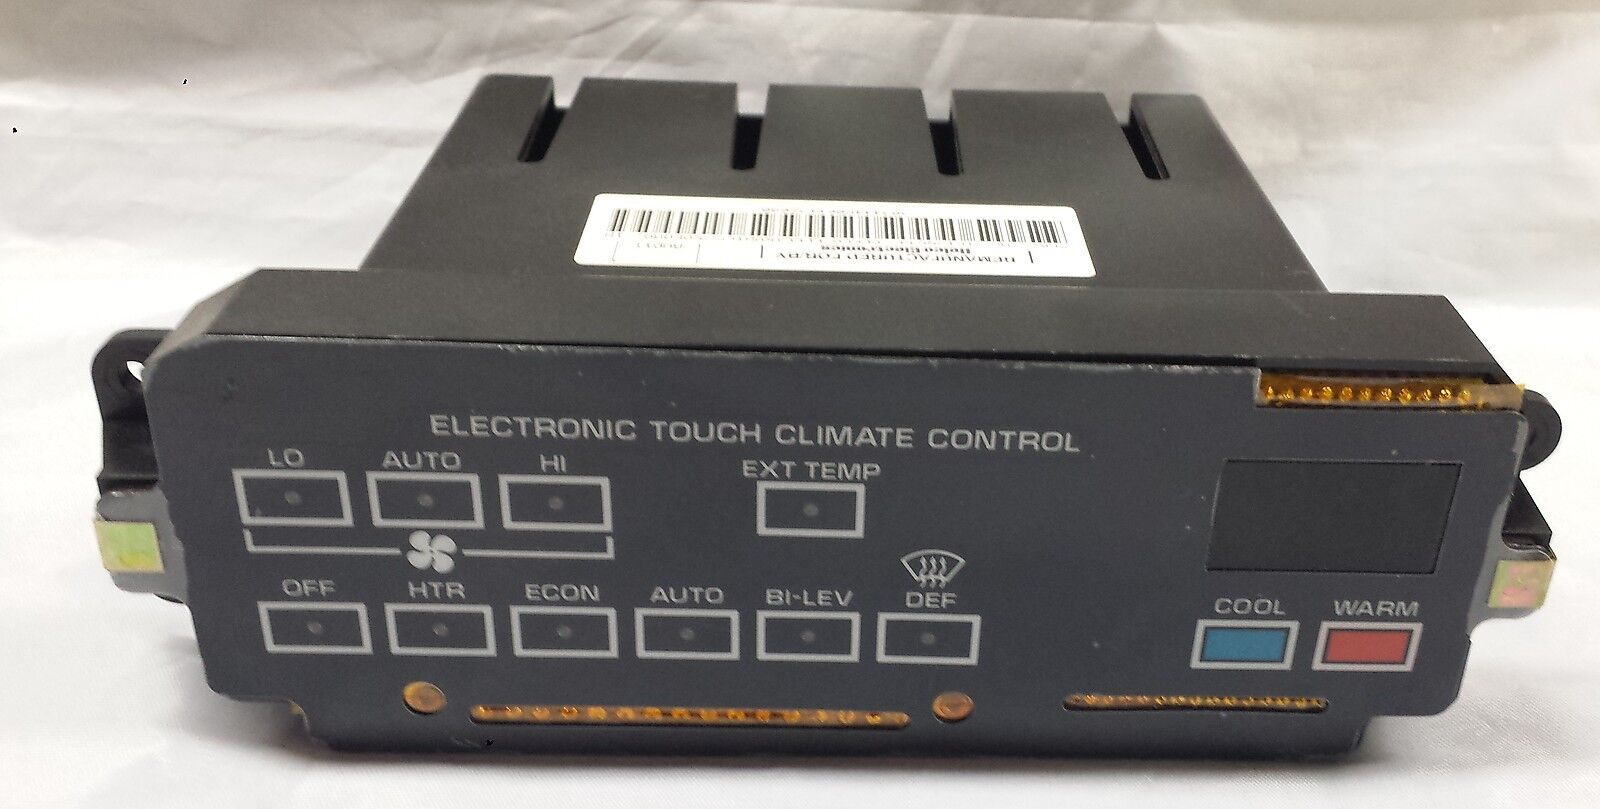 NEW OEM Electronic Touch Climate Control Fits Lesabre Electra W/O Rear Defrost